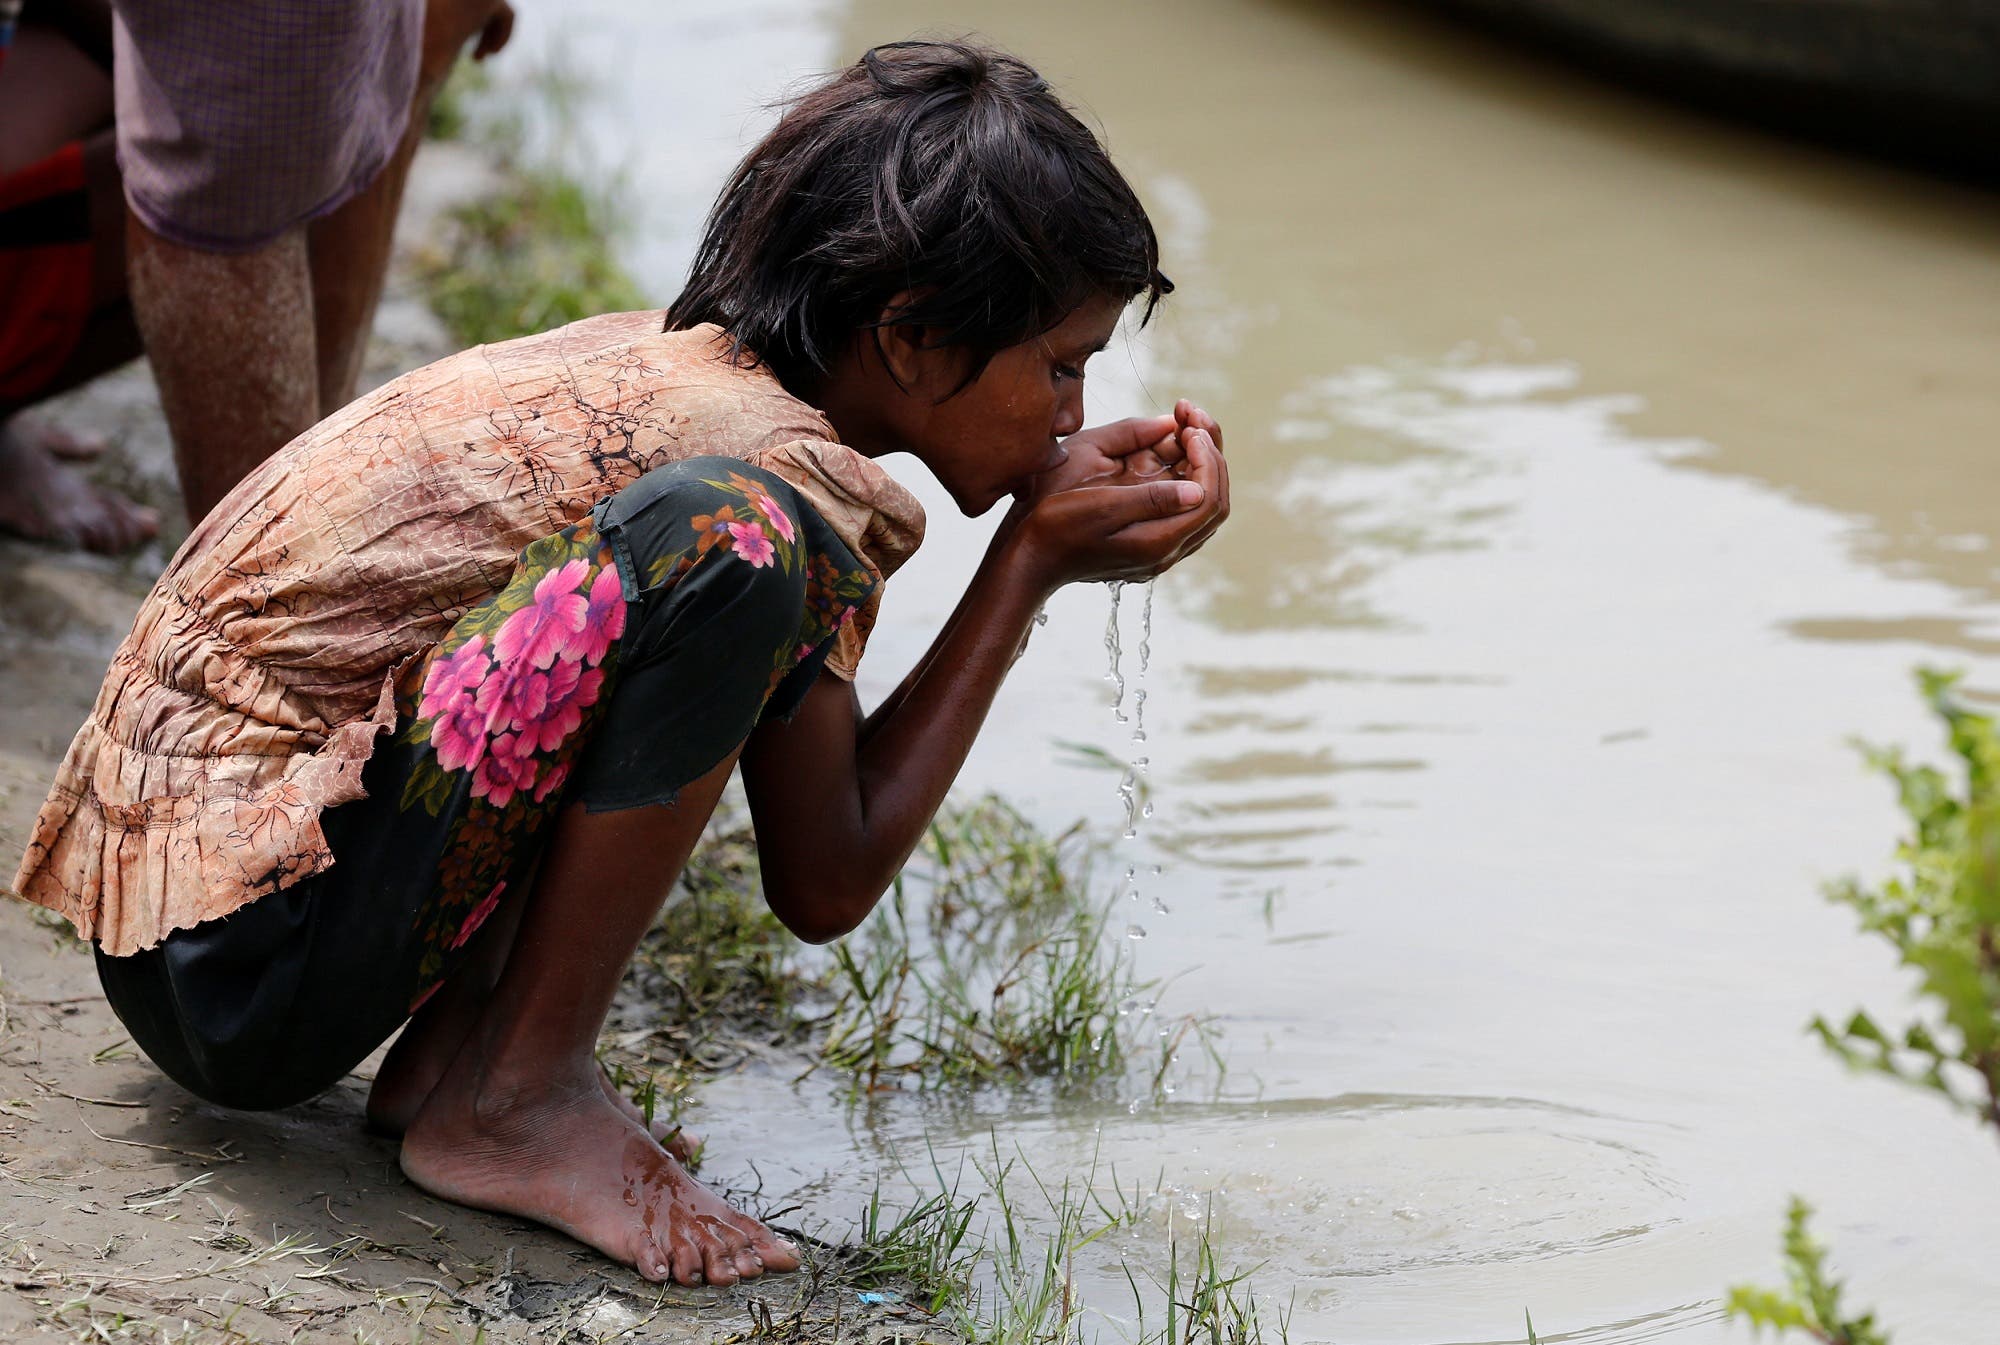 A Rohingya refugee girl drinks river water as she waits for boat to cross the border through Naf river in Maungdaw, Myanmar, September 7, 2017. (Reuters)